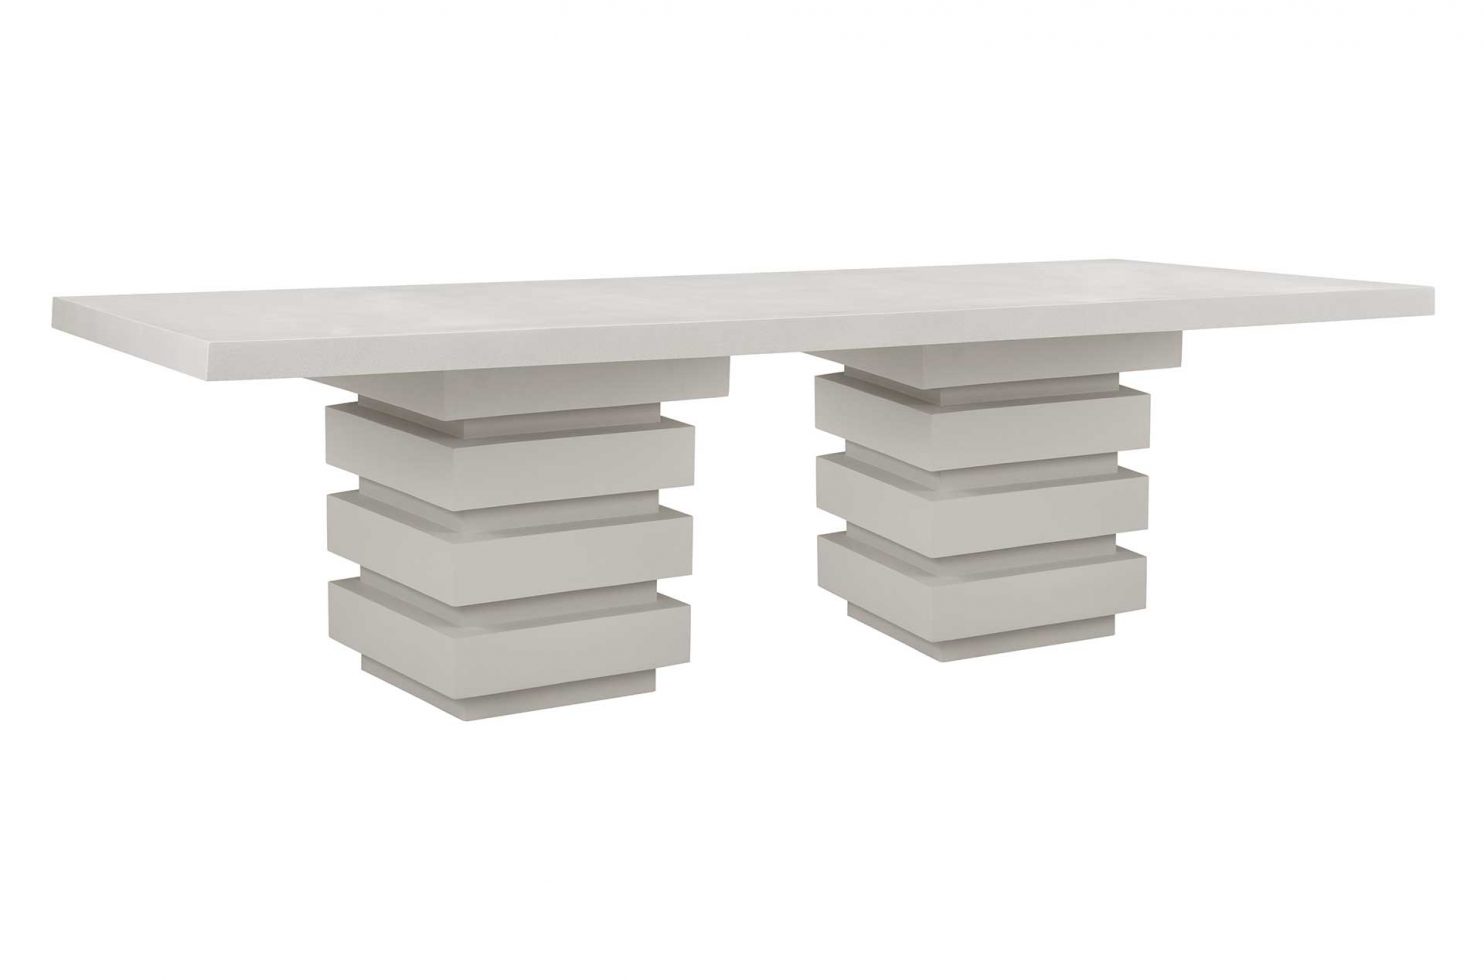 prov frp meditation rectangle dining table 108in limestone S1567134772 1 3Q web